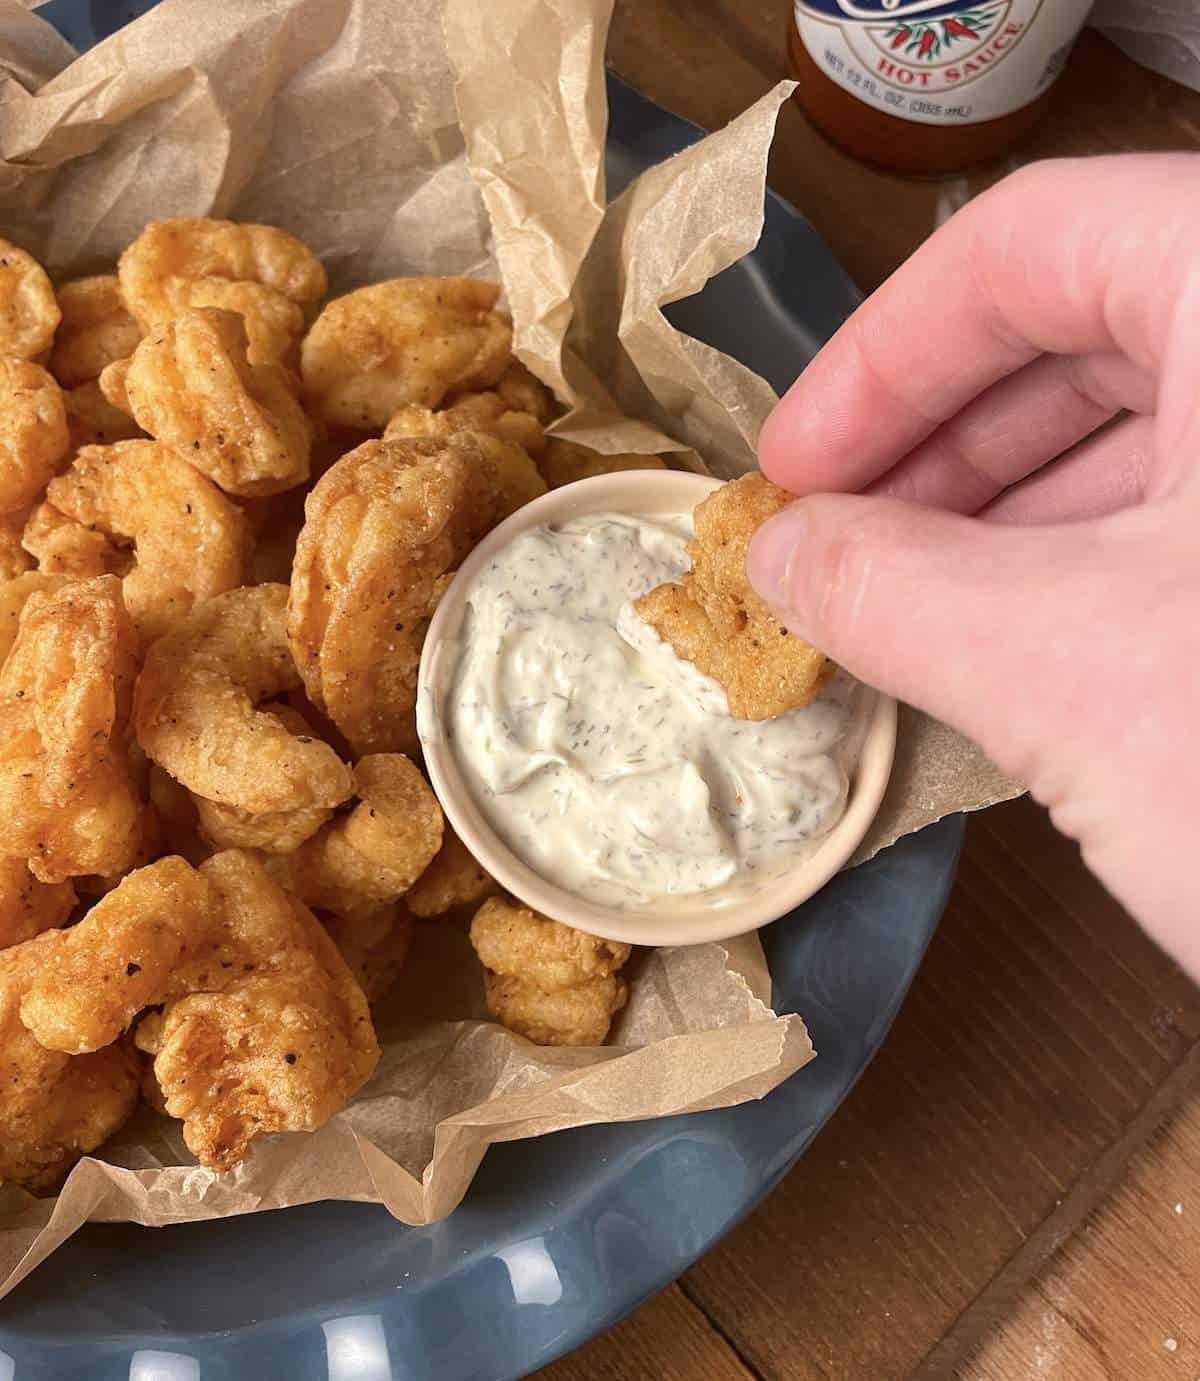 A bowl of fried shrimp with one shrimp being dipped in a small bowl of tartar sauce.